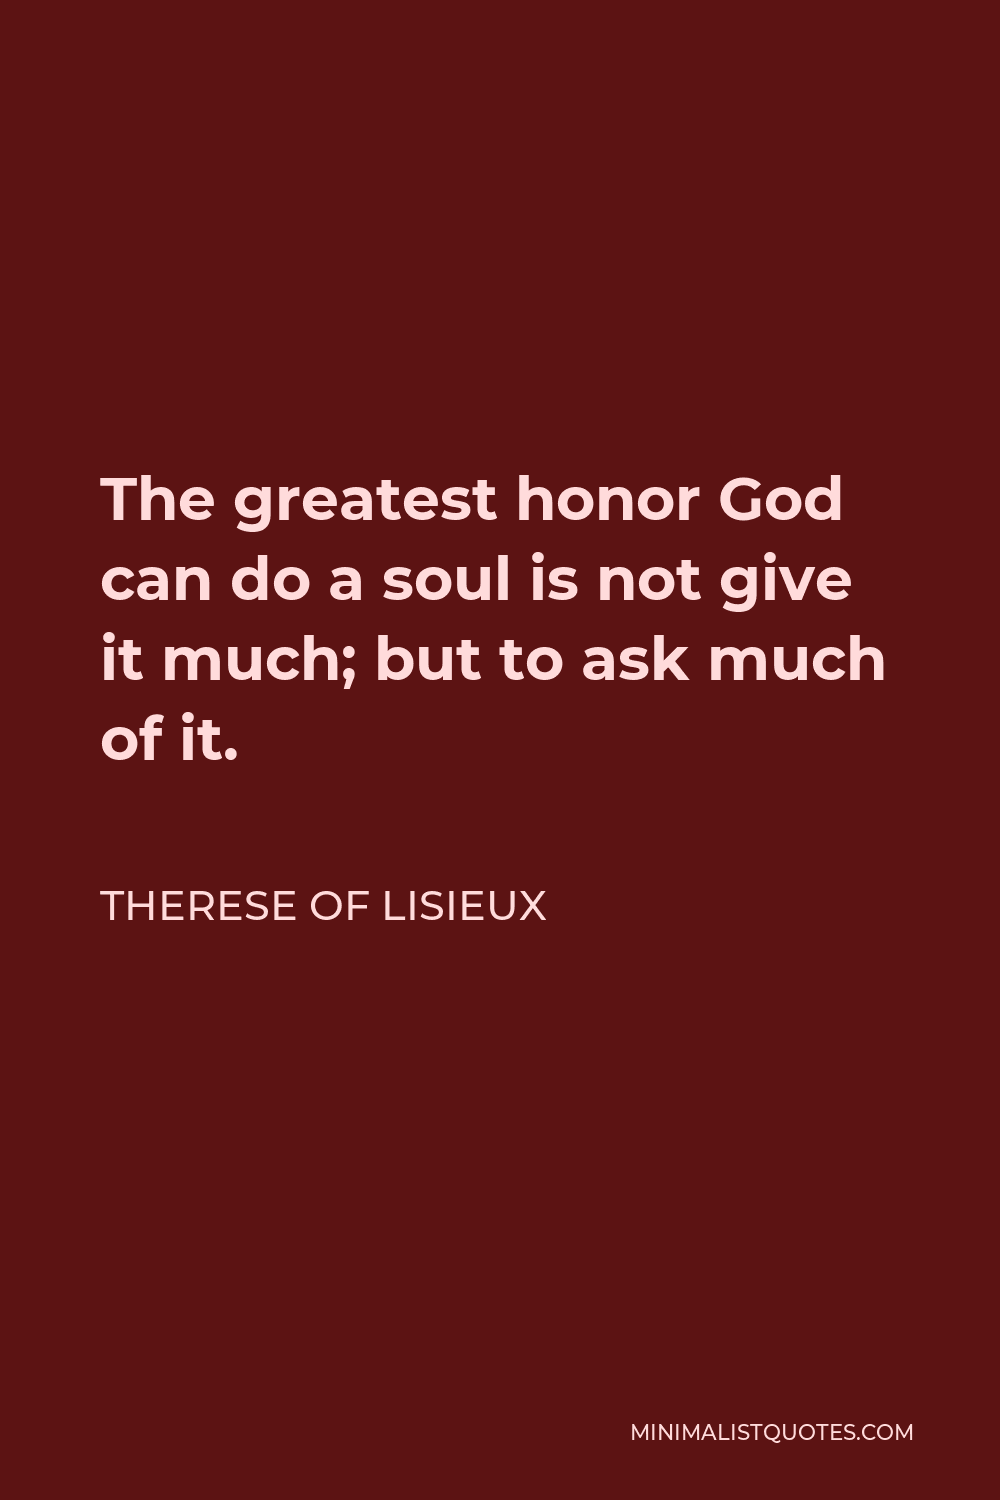 Therese of Lisieux Quote - The greatest honor God can do a soul is not give it much; but to ask much of it.